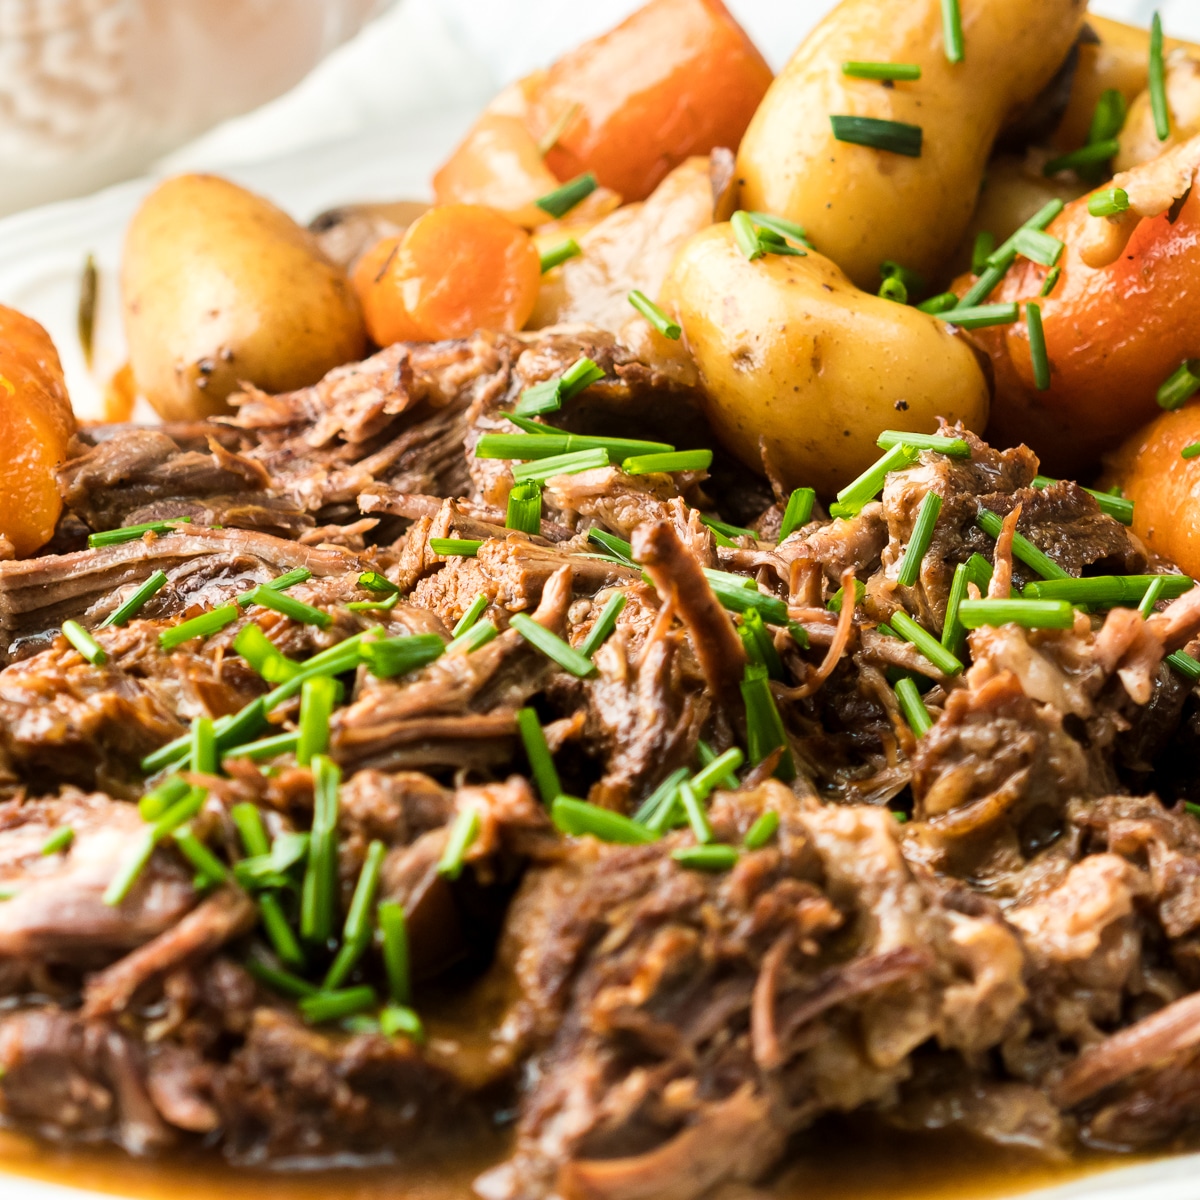 Instant Pot Pot Roast with Veggies and Gravy - Taste And See